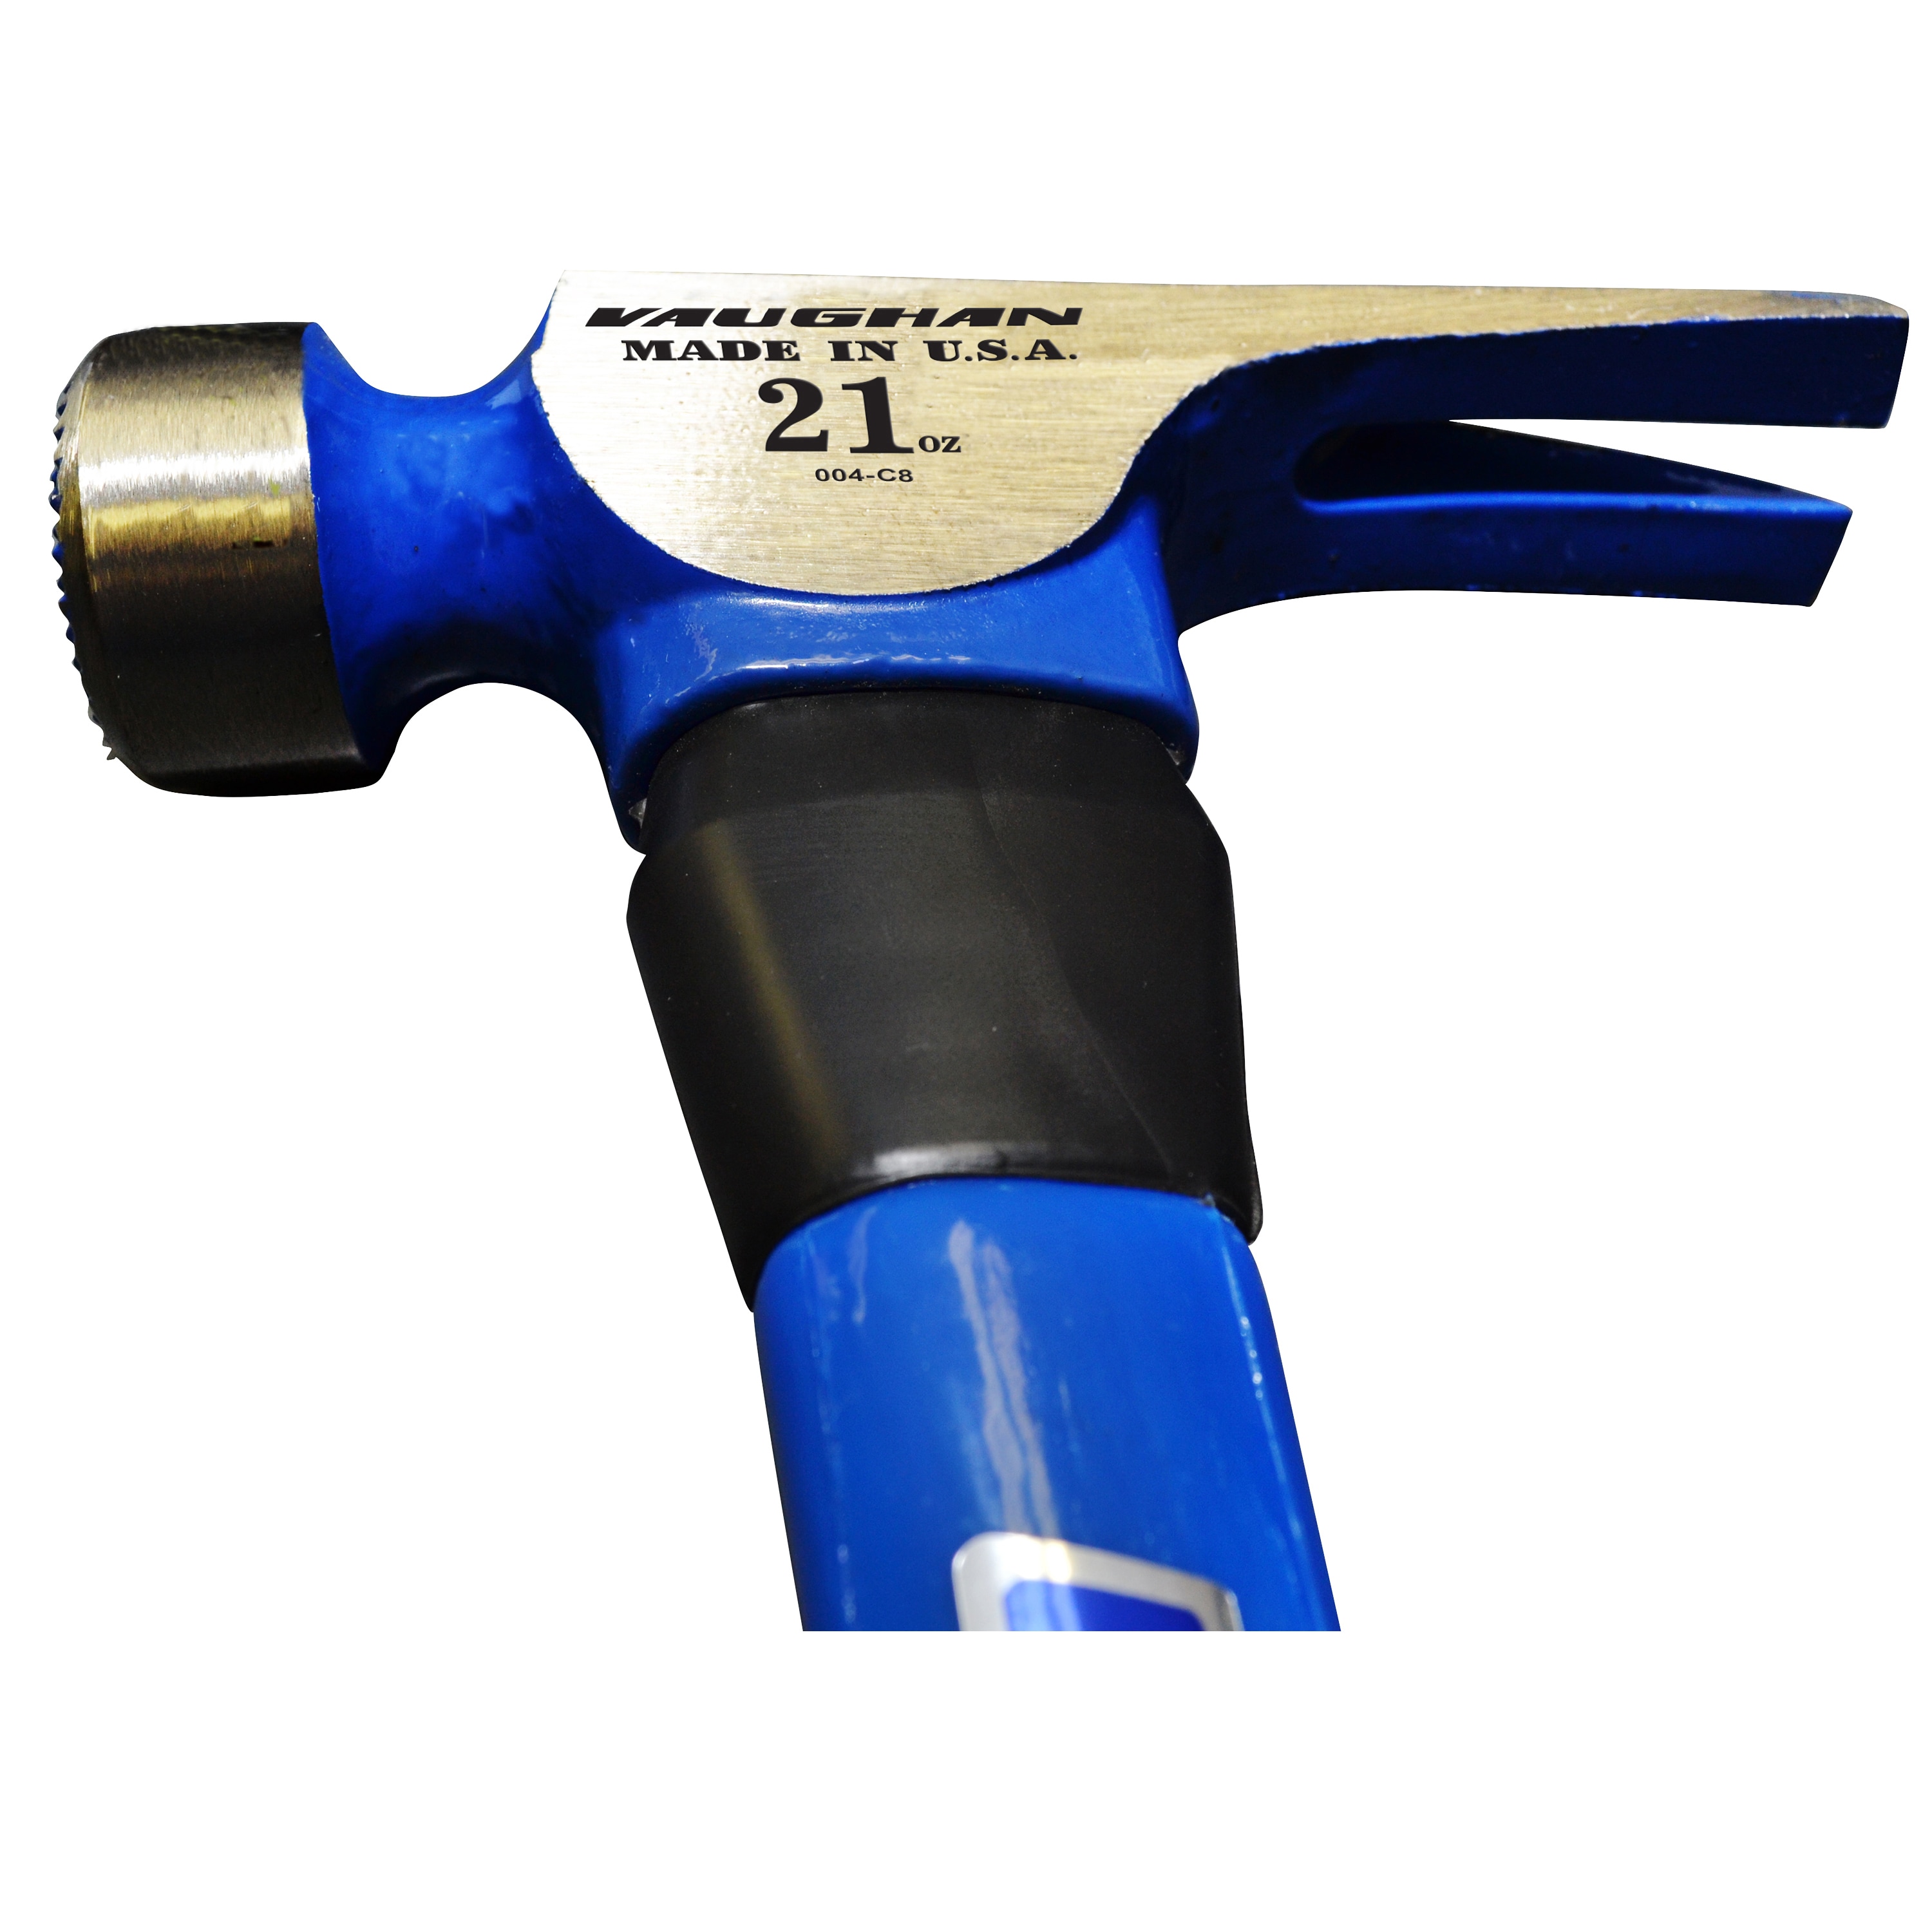 Estwing 20 oz Smooth Face Rip Hammer Steel Handle - Ace Hardware